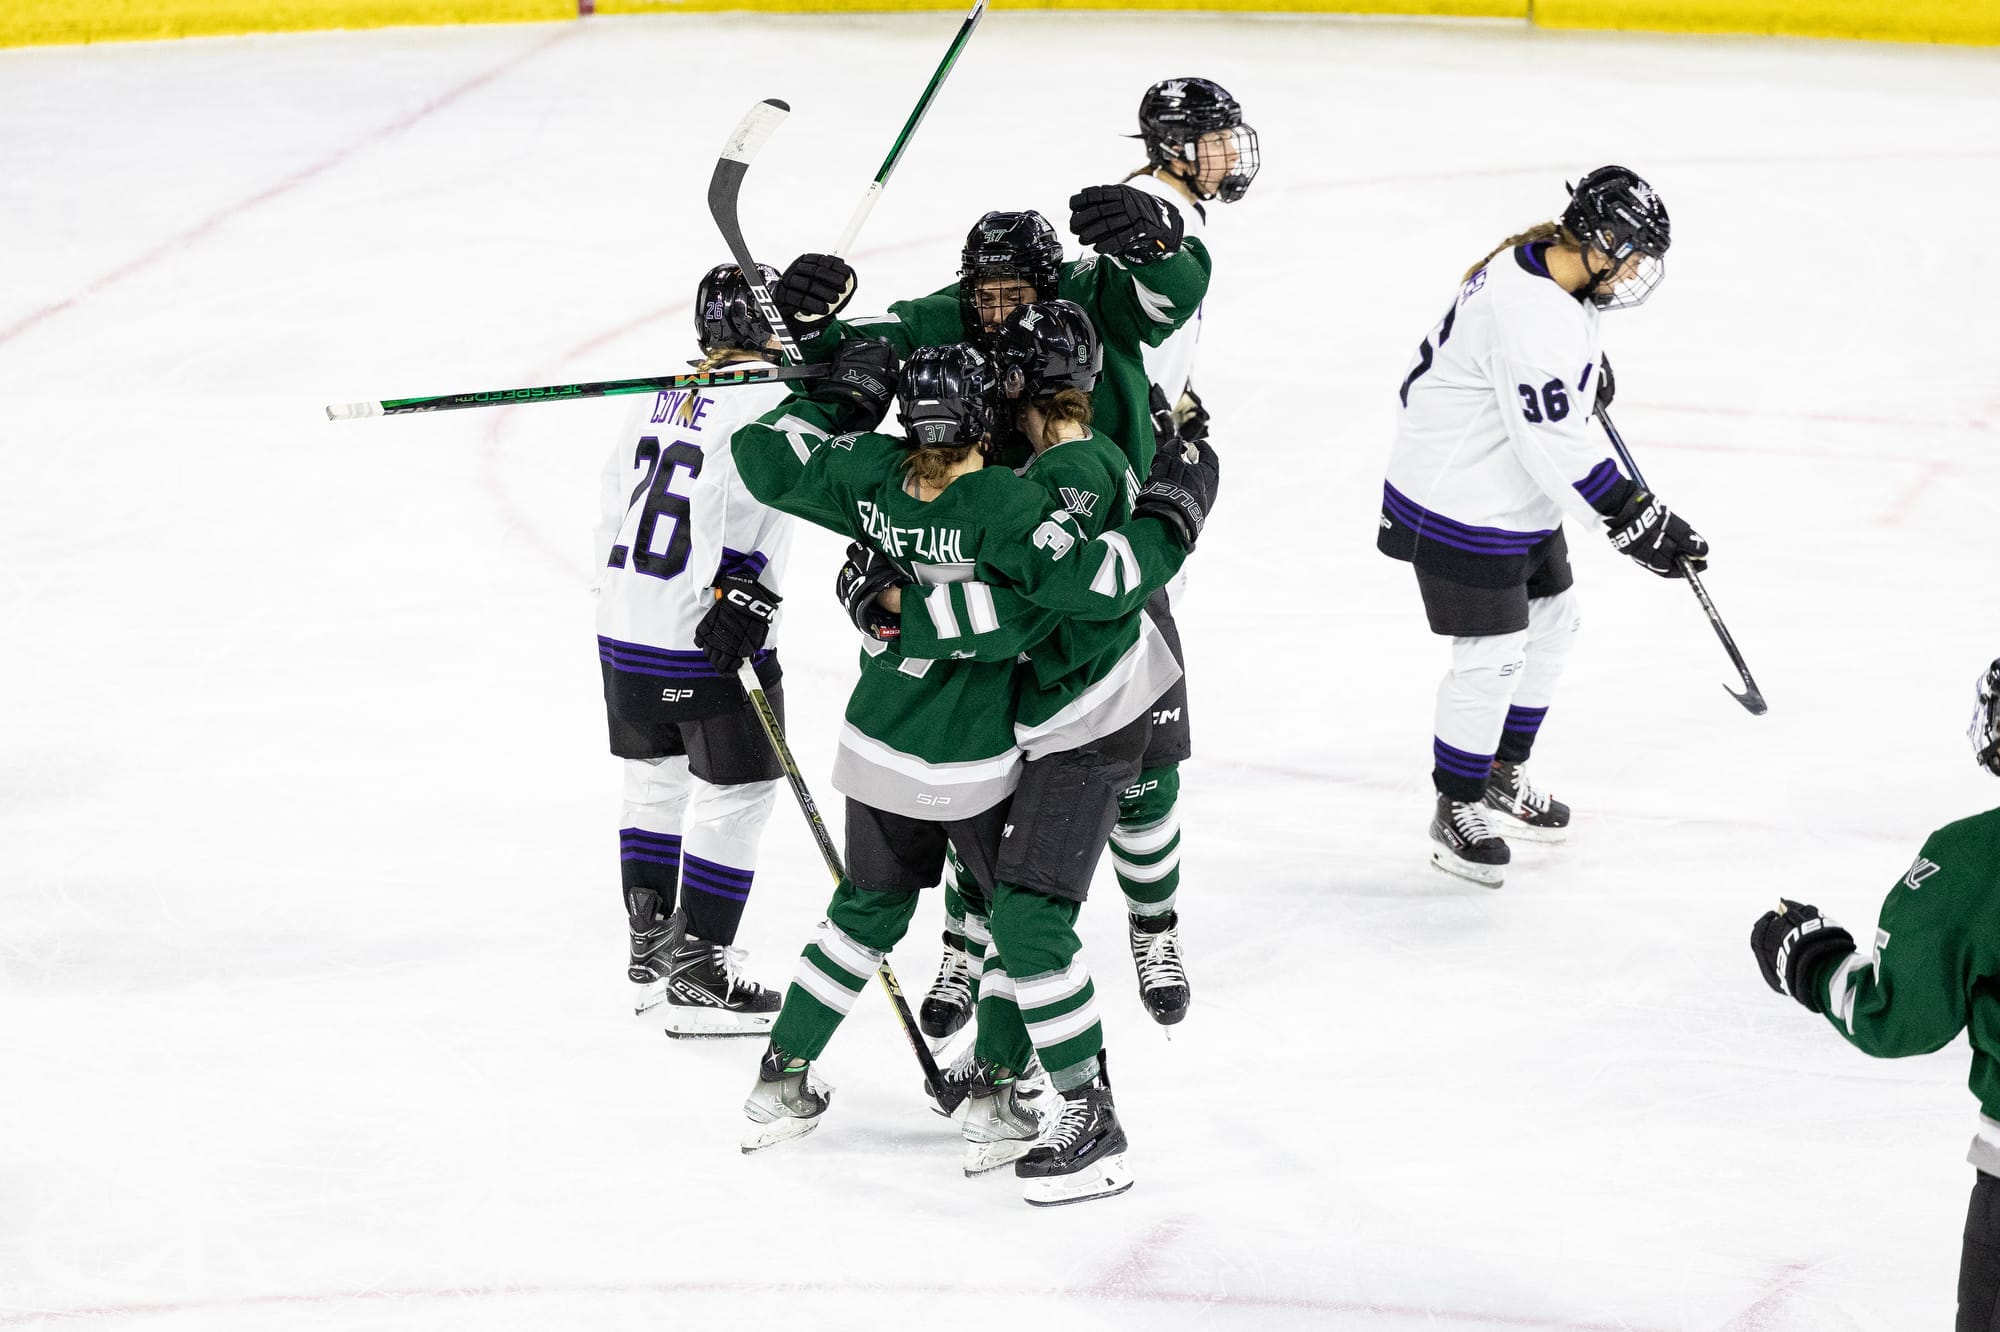 In their green home uniforms, teammates celebrate with Theresa Schafzahl after her goal.